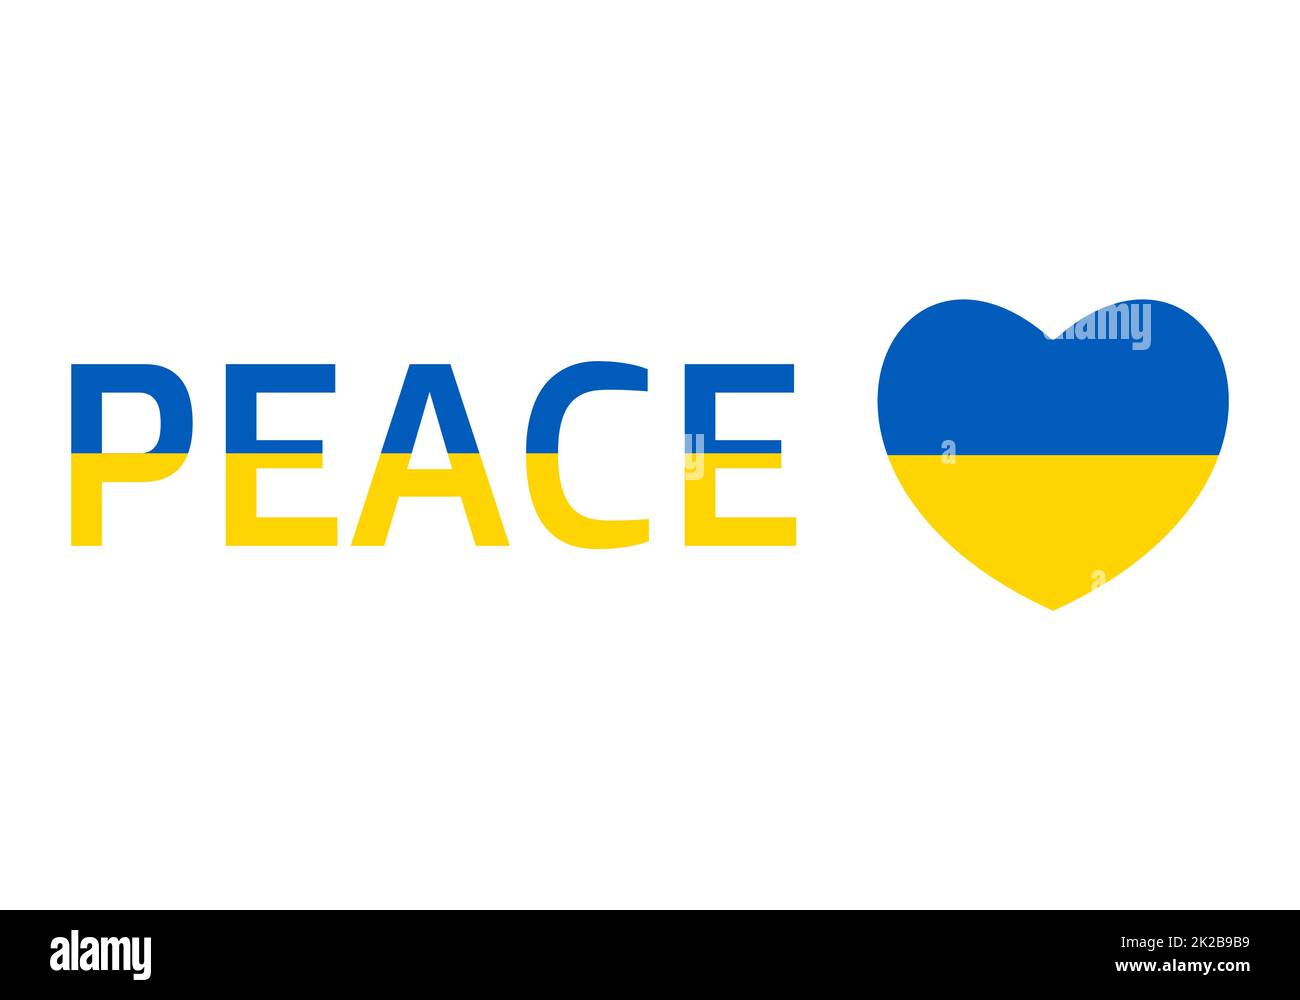 Ukraine flag icon in the shape of heart and peace text. Abstract patriotic ukrainian flag with love symbol. Conceptual idea - with Ukraine in his heart. Support for the country during the occupation. Stock Photo